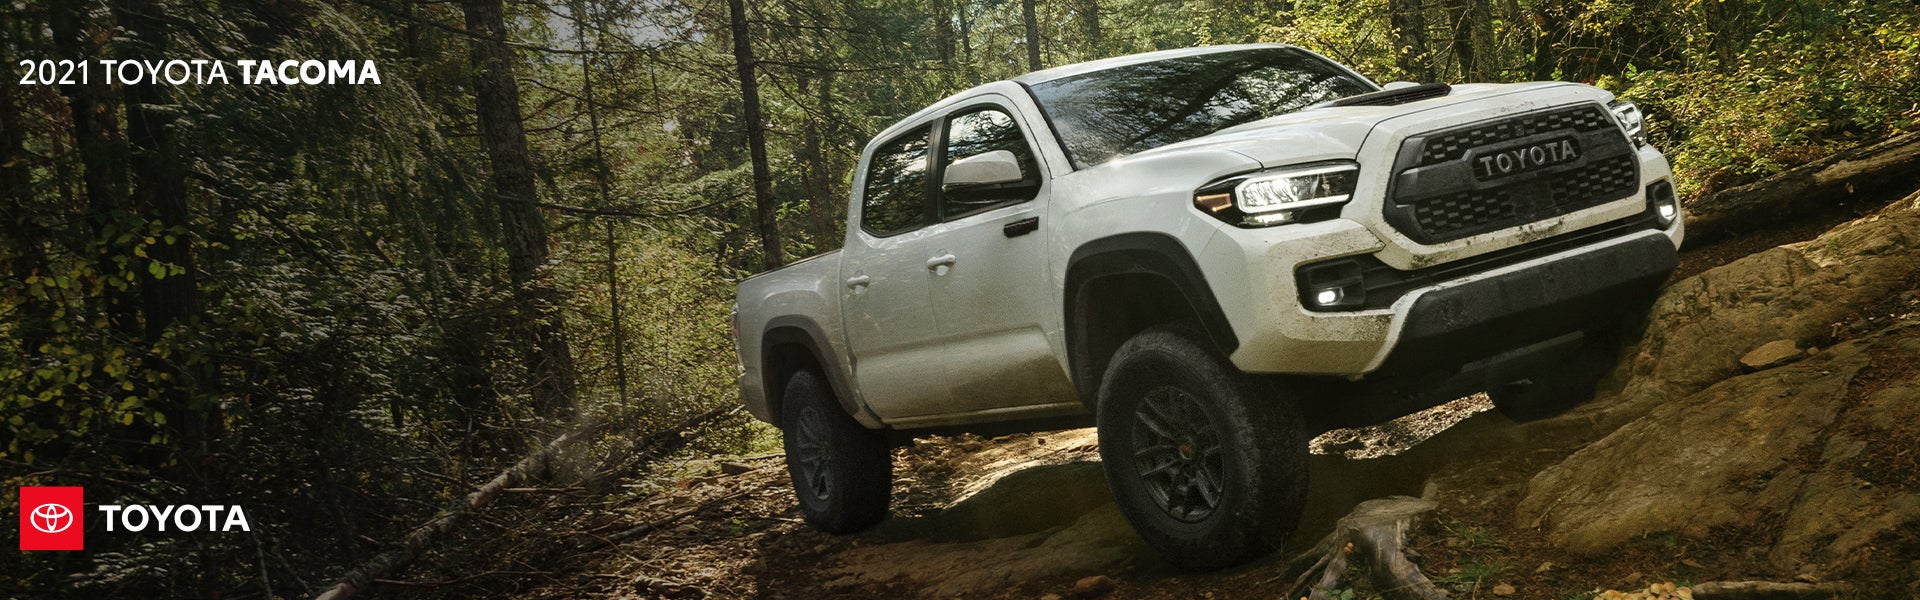 2021 Toyota Tacoma at Rolling Hills Toyota in St. Joseph